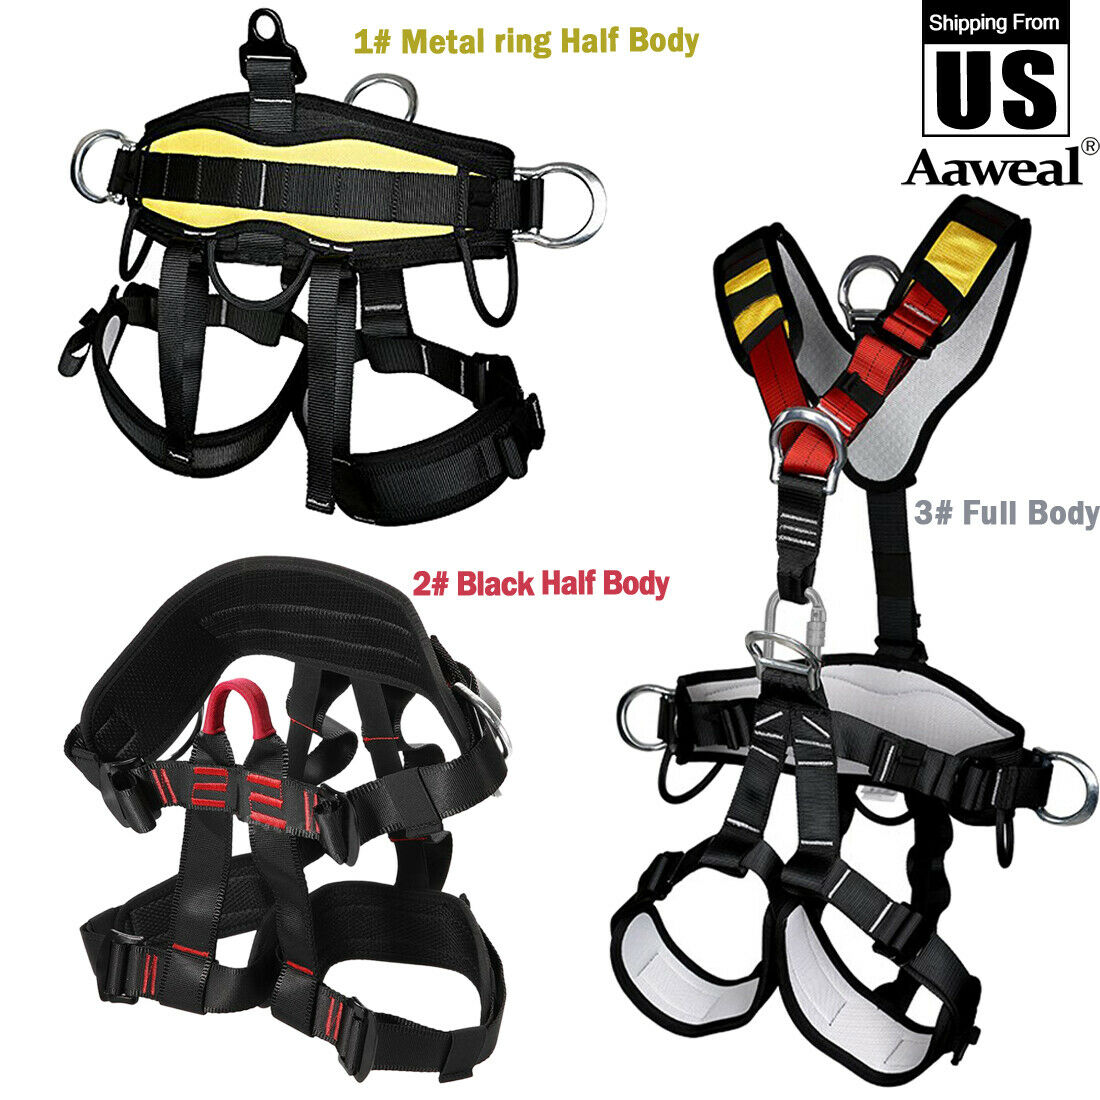 Pro Tree Carving Rock Climbing Harness Equip Gear Rappel Rescue Safety Seat Belt